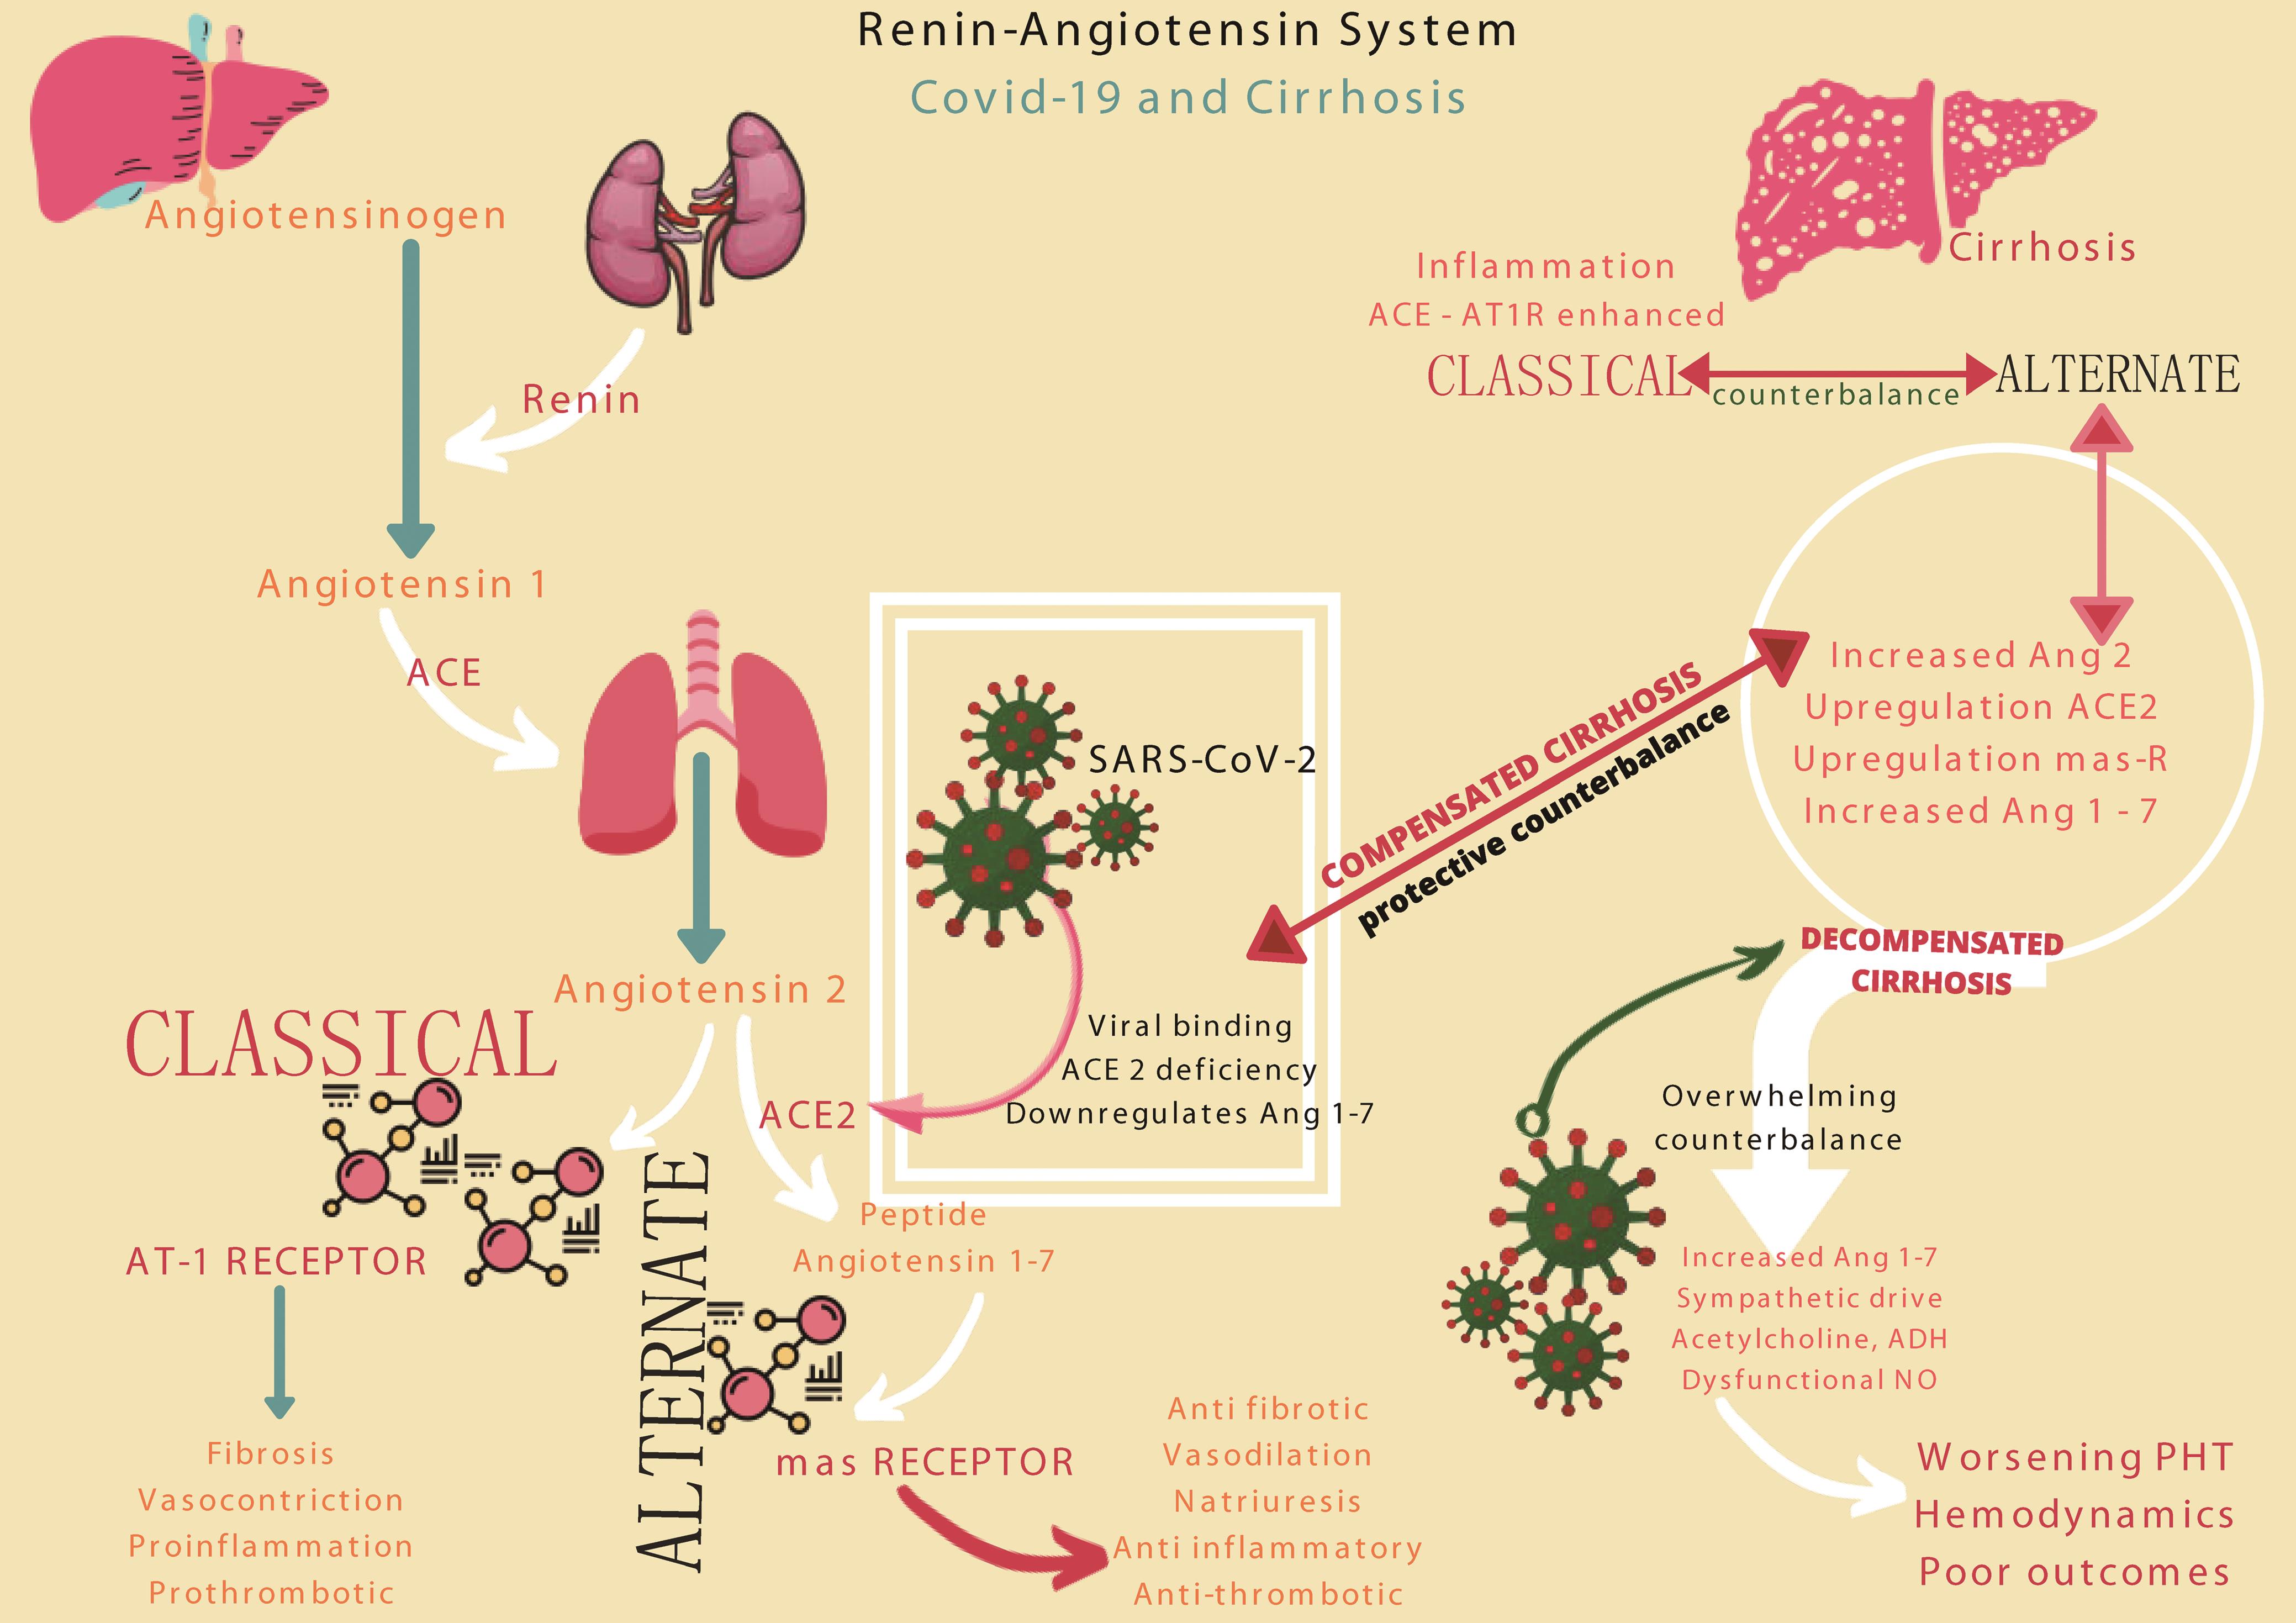 RAS and its central role in pathophysiology of COVID-19 and cirrhosis.